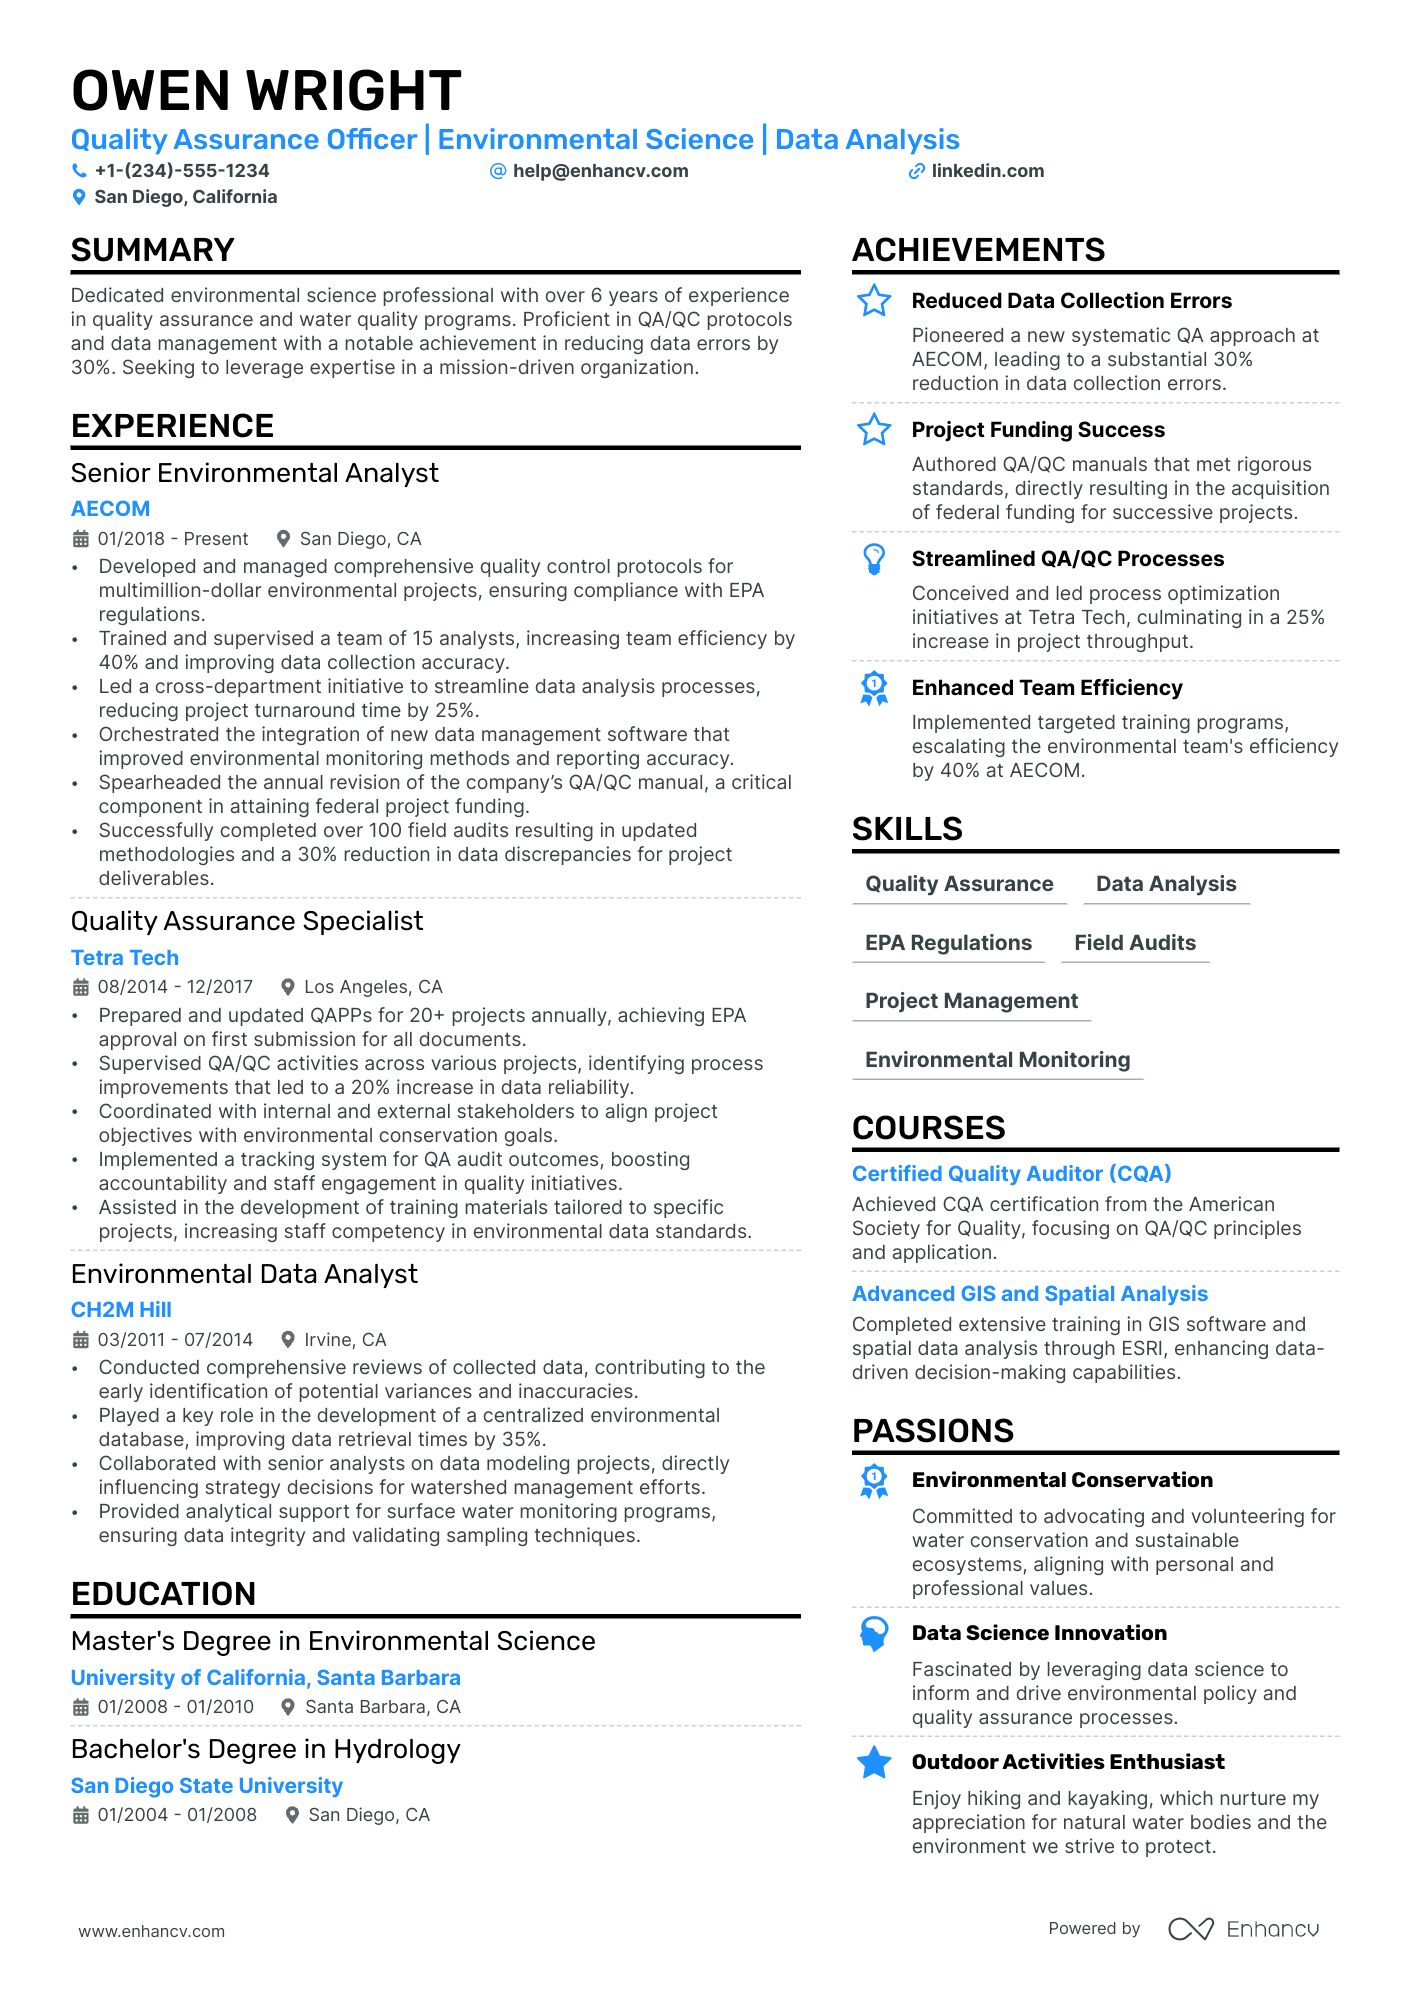 sample resume for quality assurance specialist